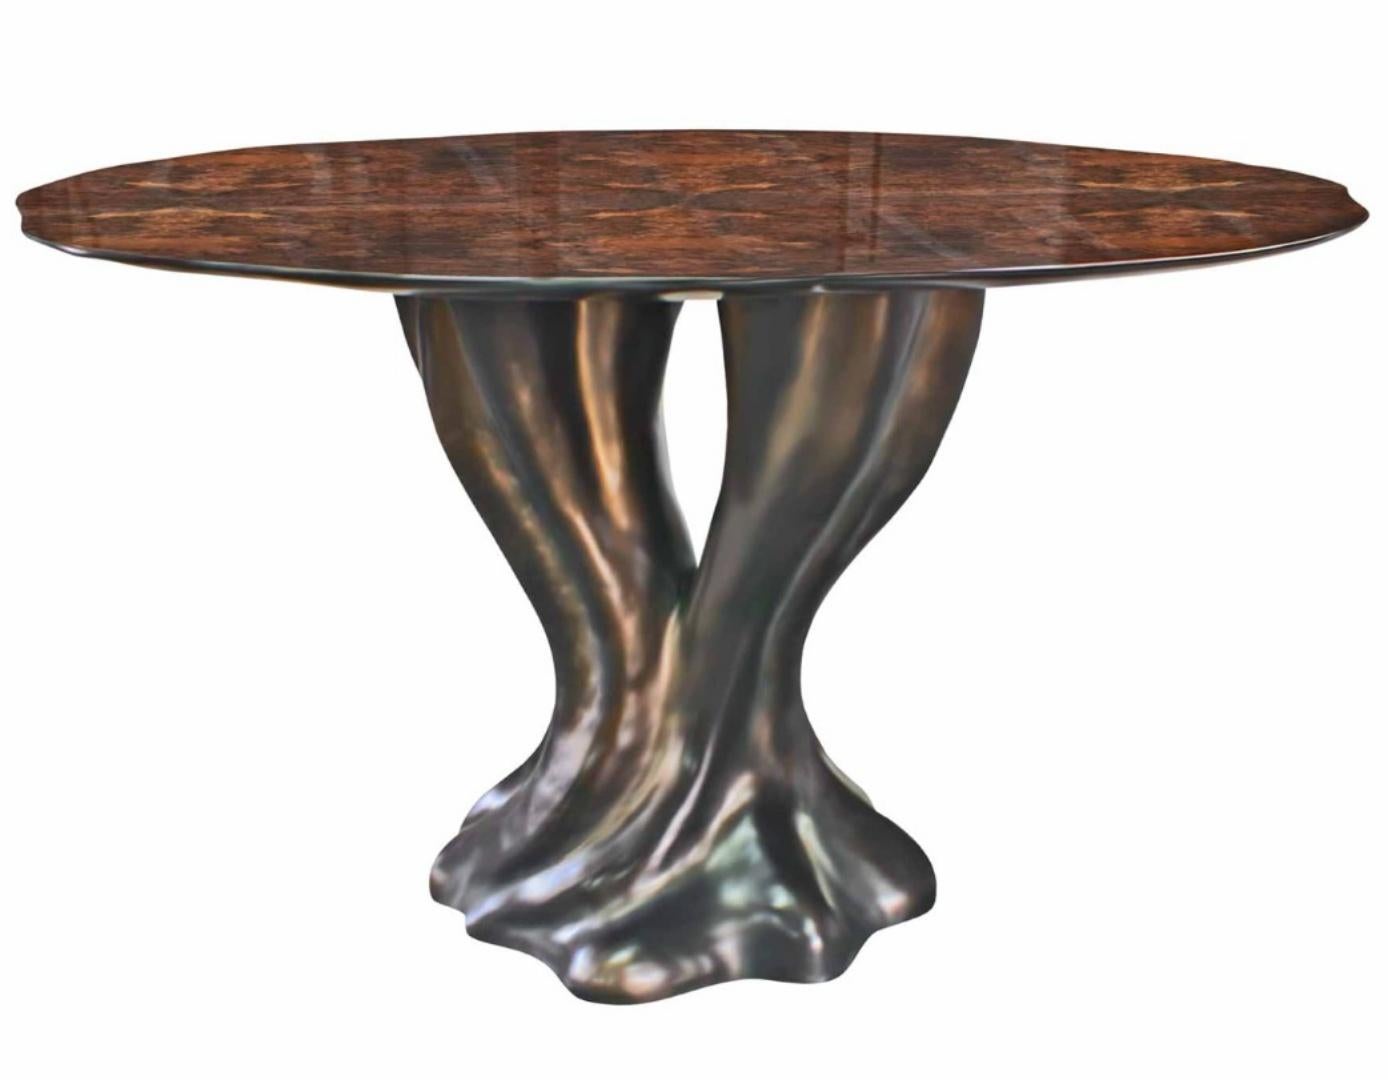 Dining table

General information

Dimensions (cm): Ø120 x 75
Dimensions (in): Ø47.2 x 29.5
Seats: 4 a 6

Materials and colors

Top: Wood with walnut root veneer, with high gloss finish;
Base: Resin reinforced with fiberglass finished in bronze